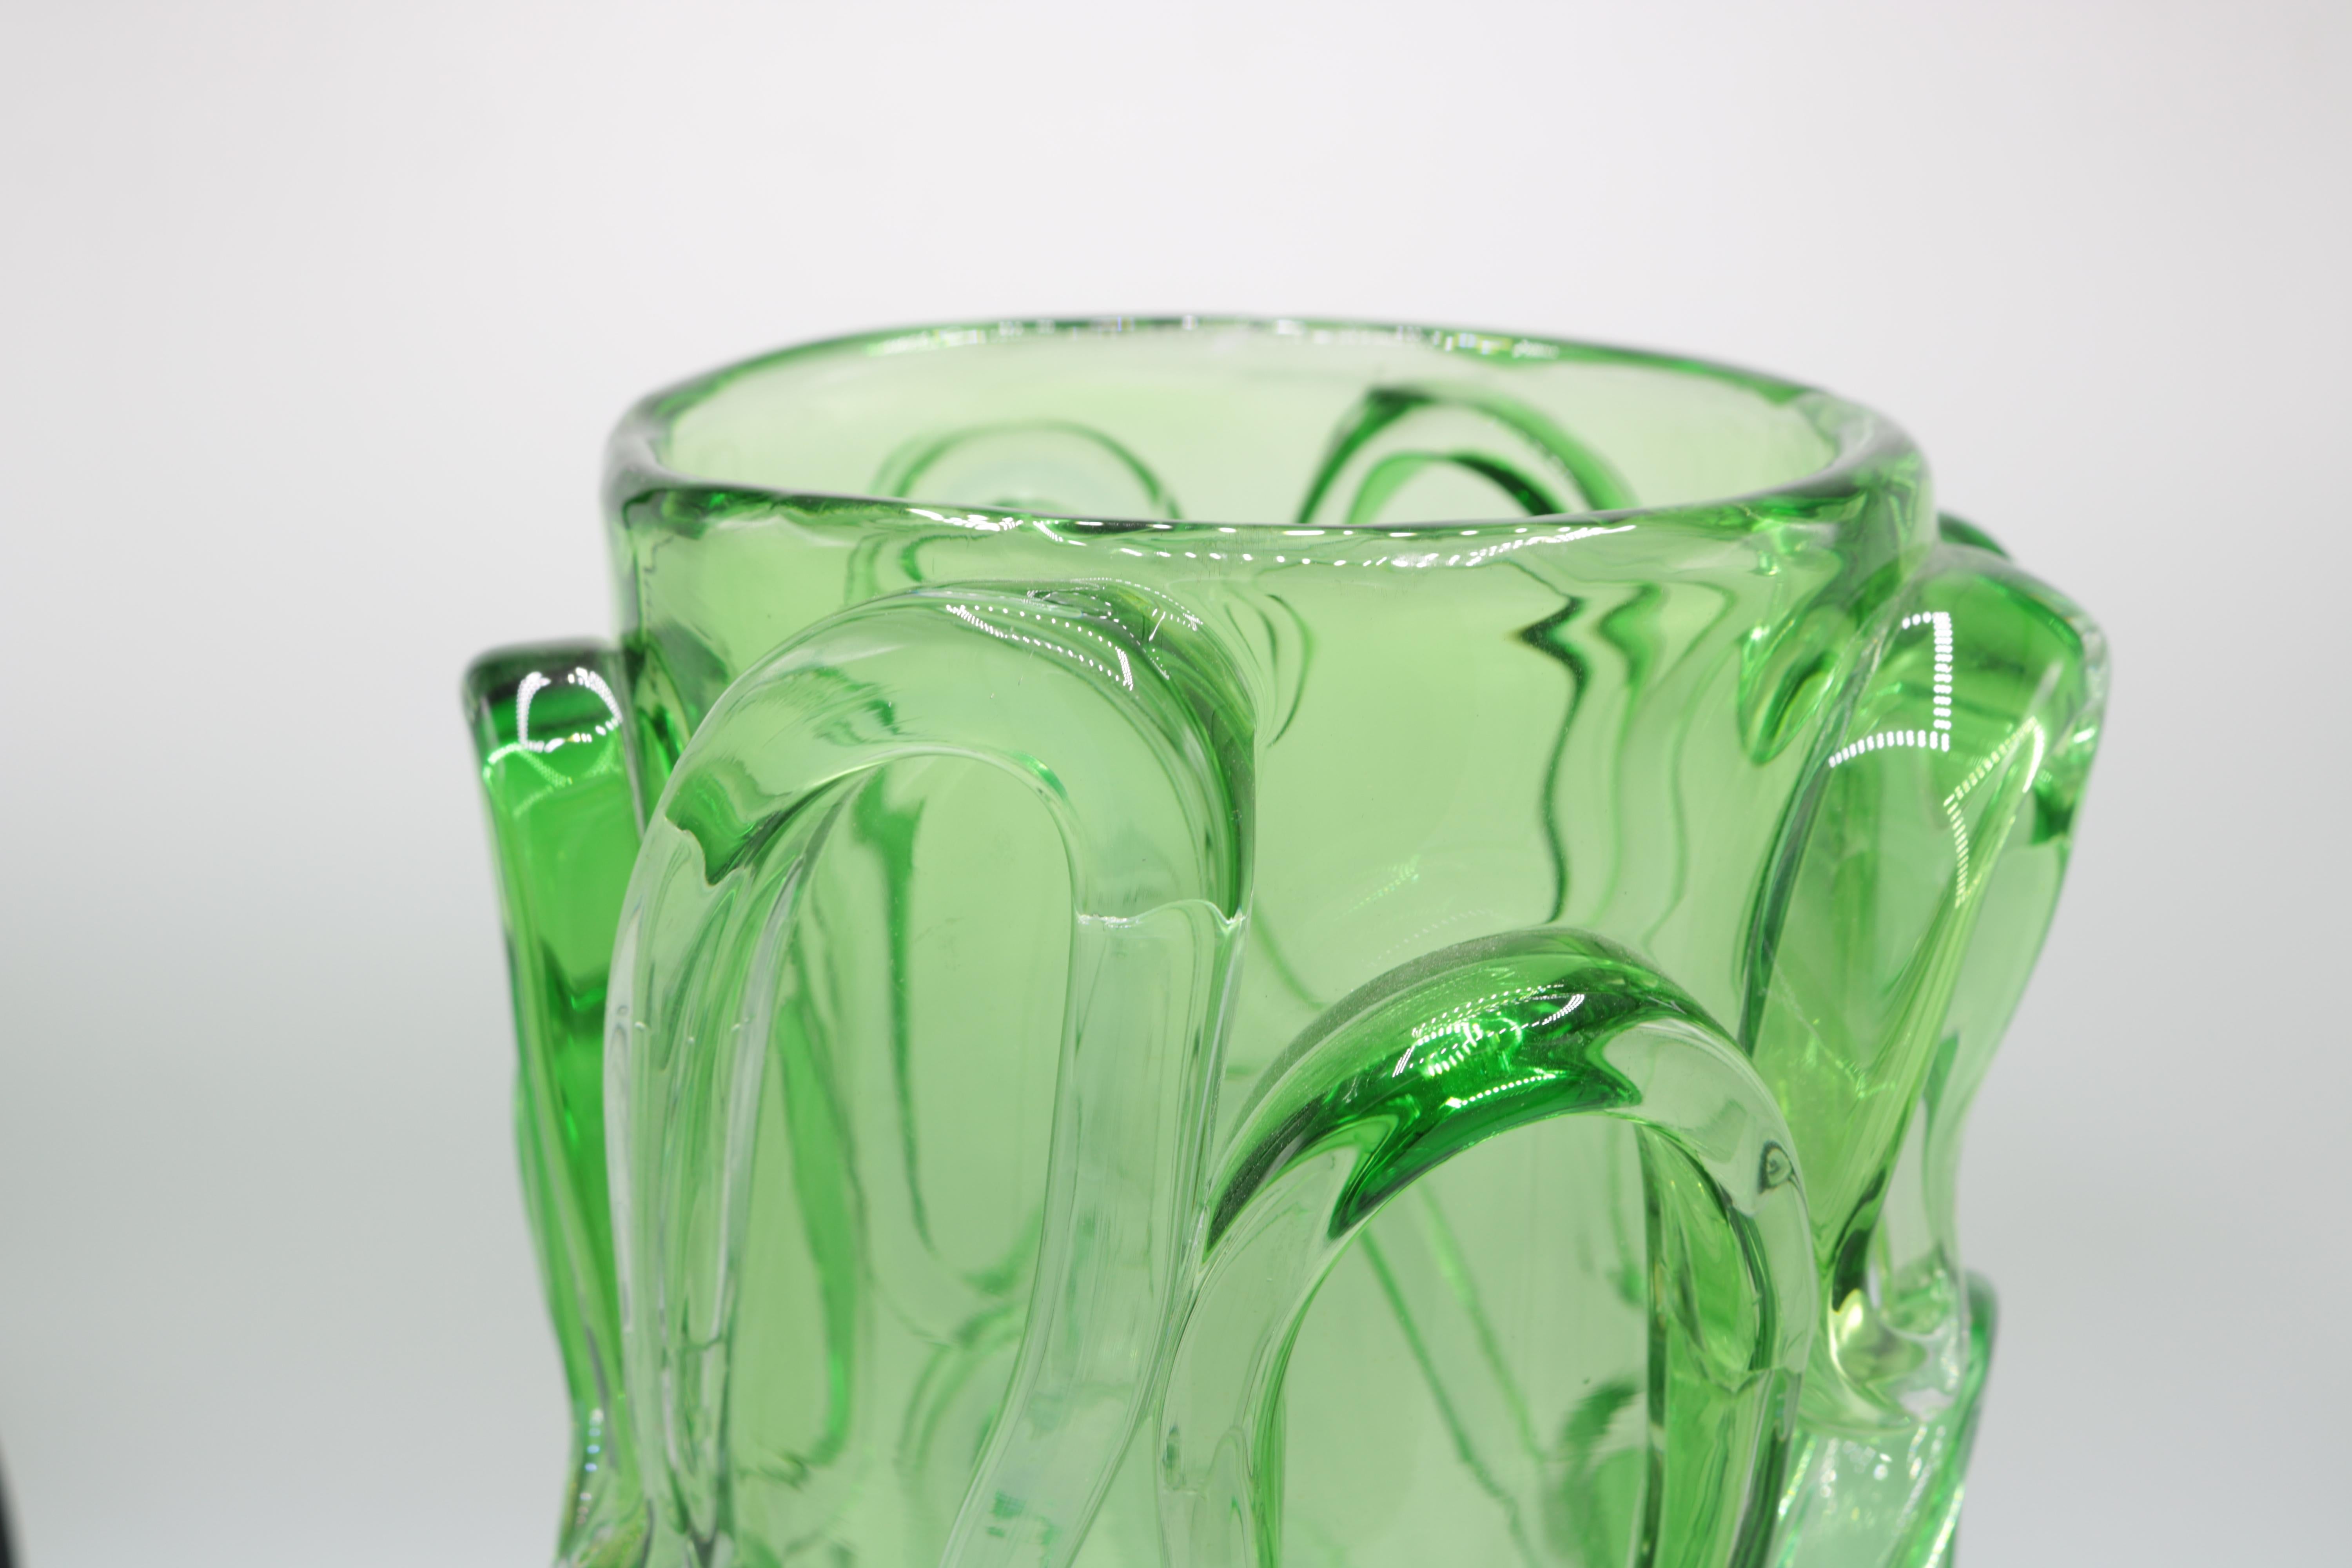 Limited edition art glass vase by Martin Postch. 
Green glass with applied prunts. 
Etched signature on the bottom.